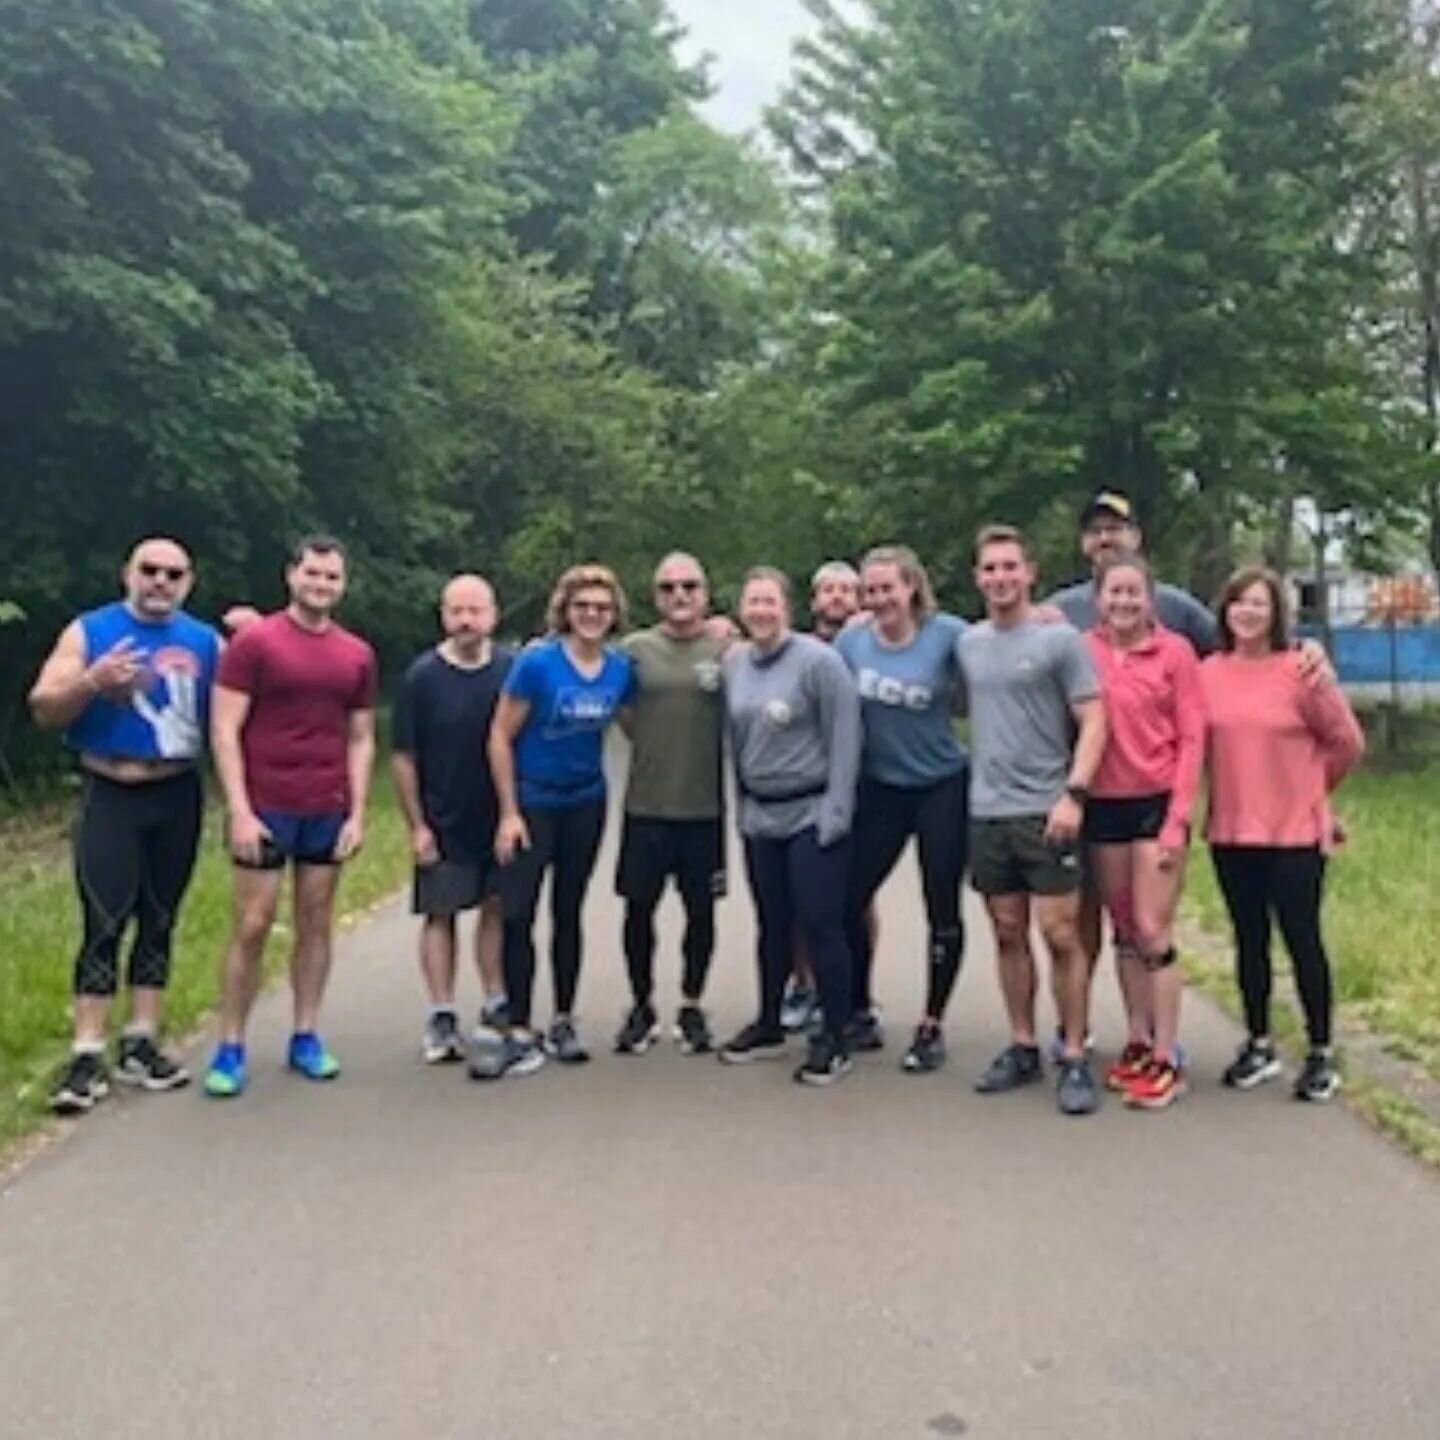 8 am crew picked up some more of the #ecf fam! Rich started Thursday and killed it, finishing his last interval with the 8 am! We are gearing up for the noon run, a little rainy but should feel good. Thank you all for your donations, we have exceedes